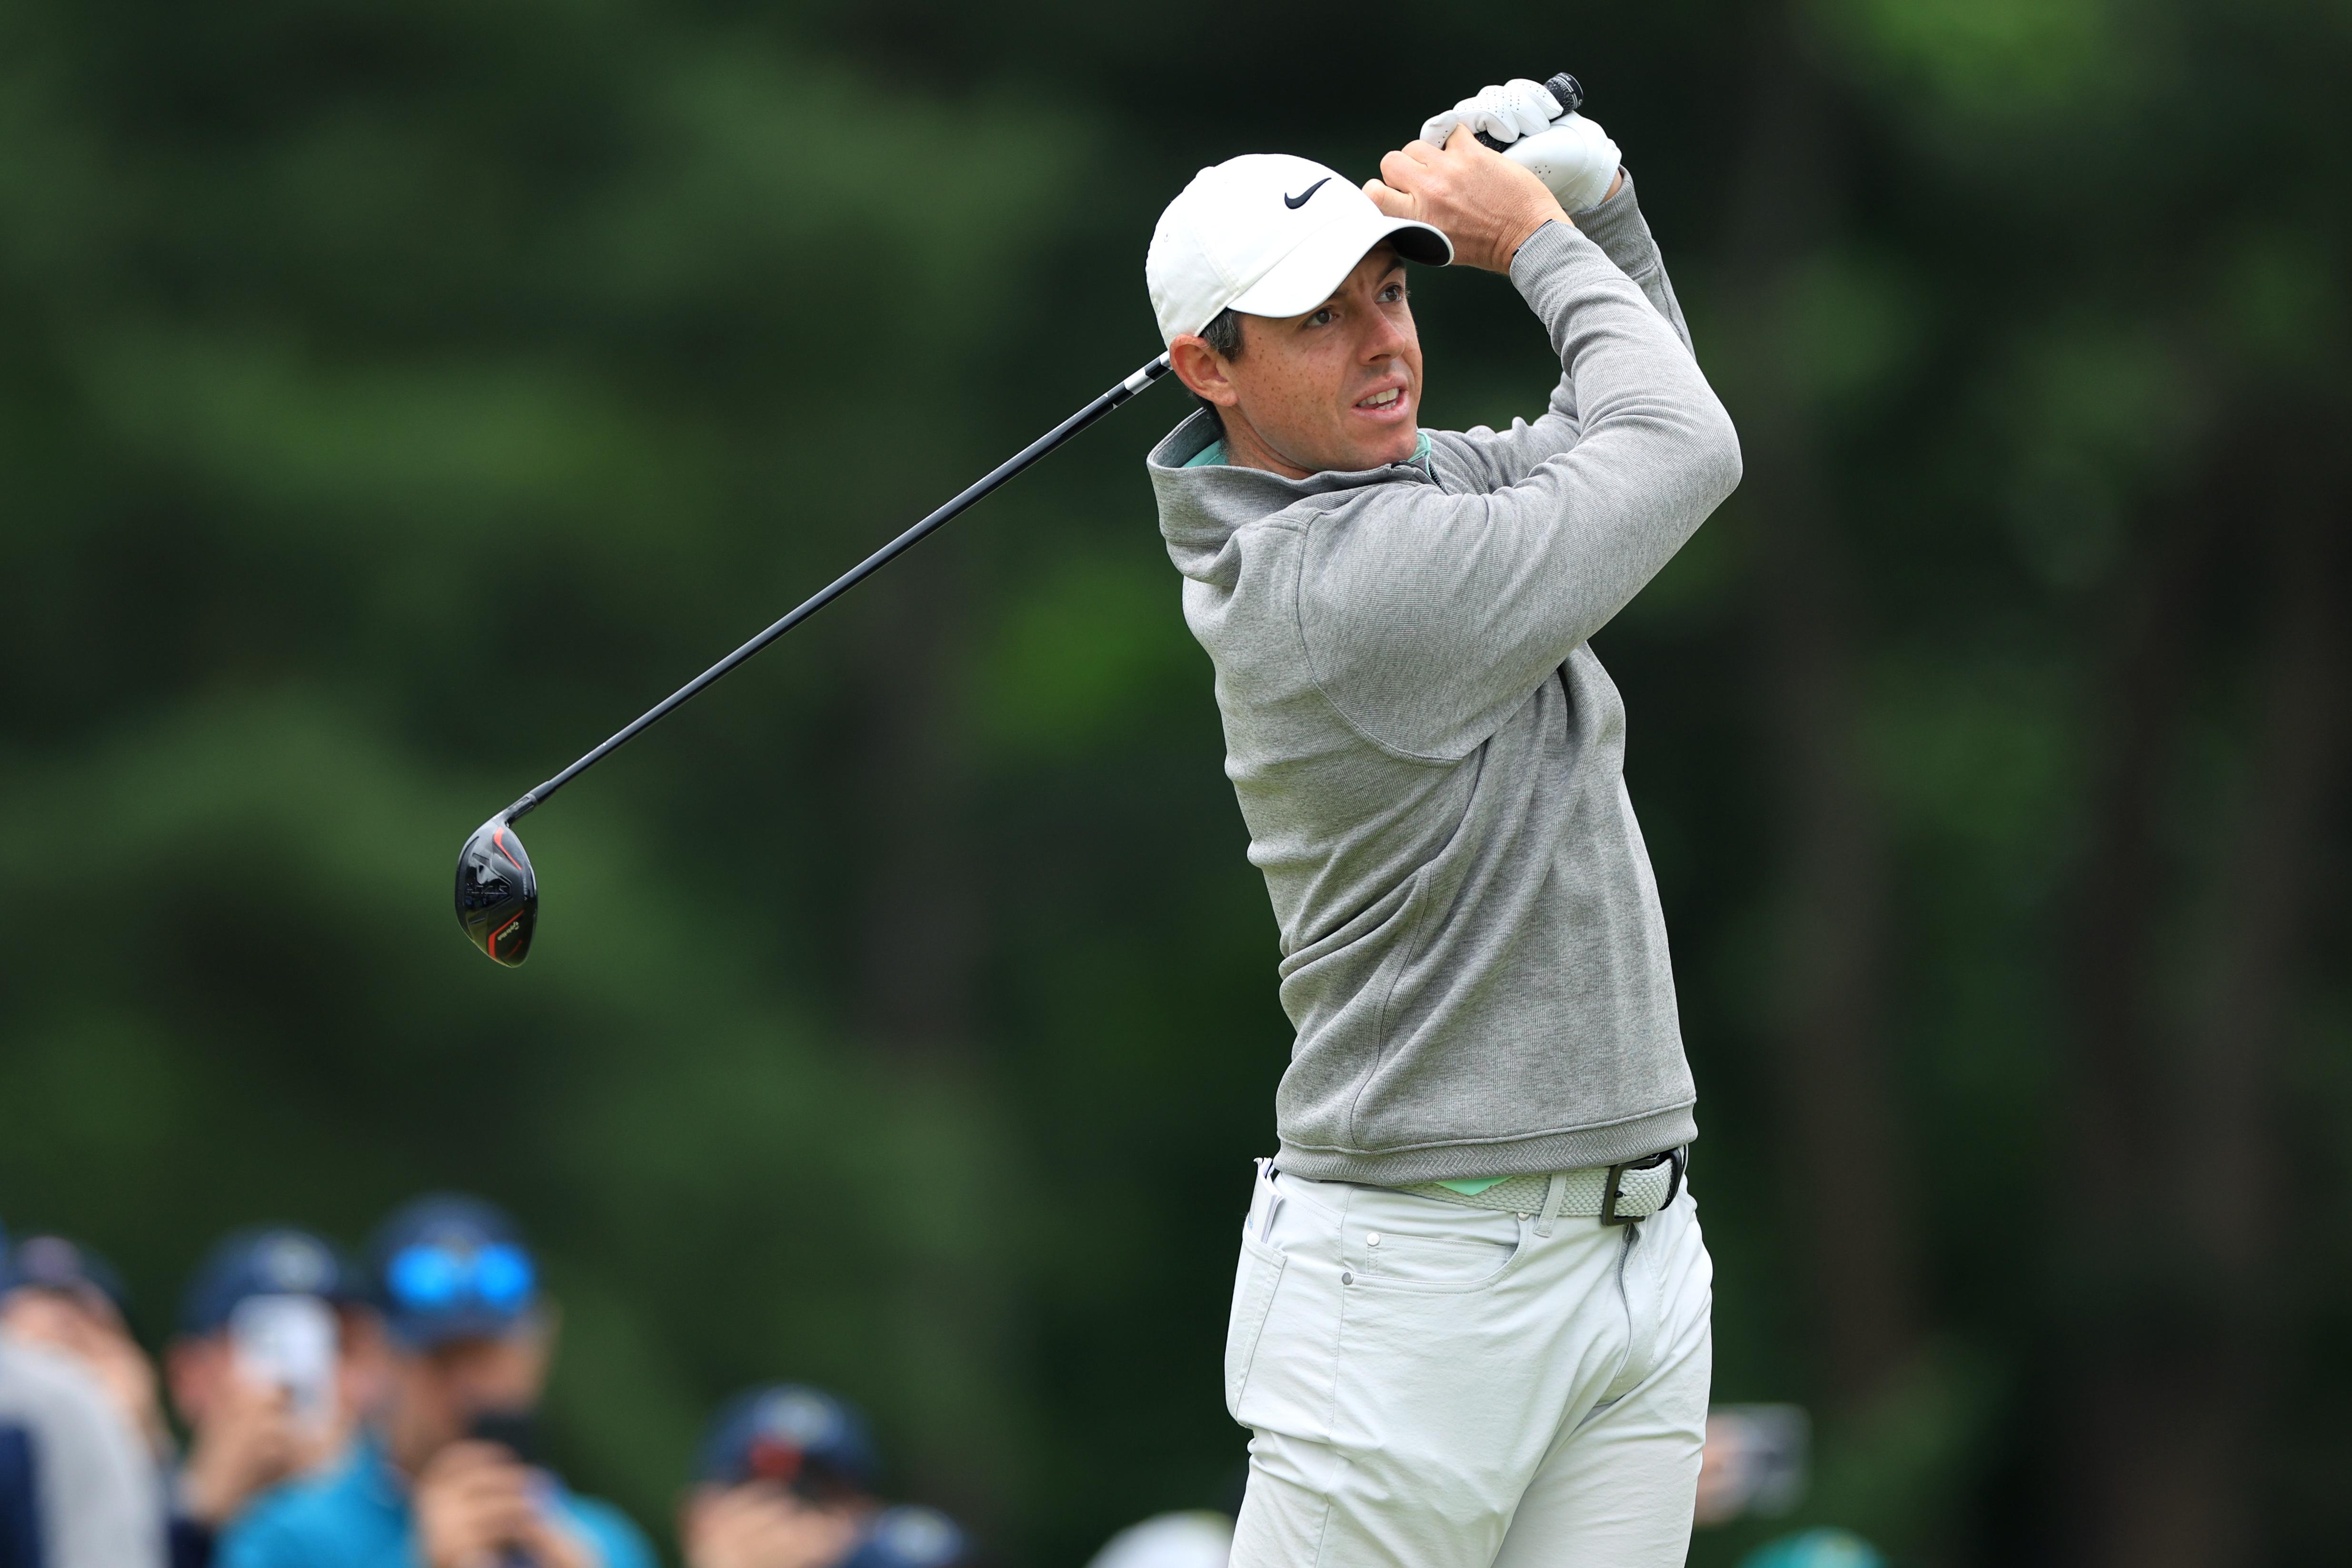 2022 Open Championship Power Rankings: Top 10 Golfers by the Odds